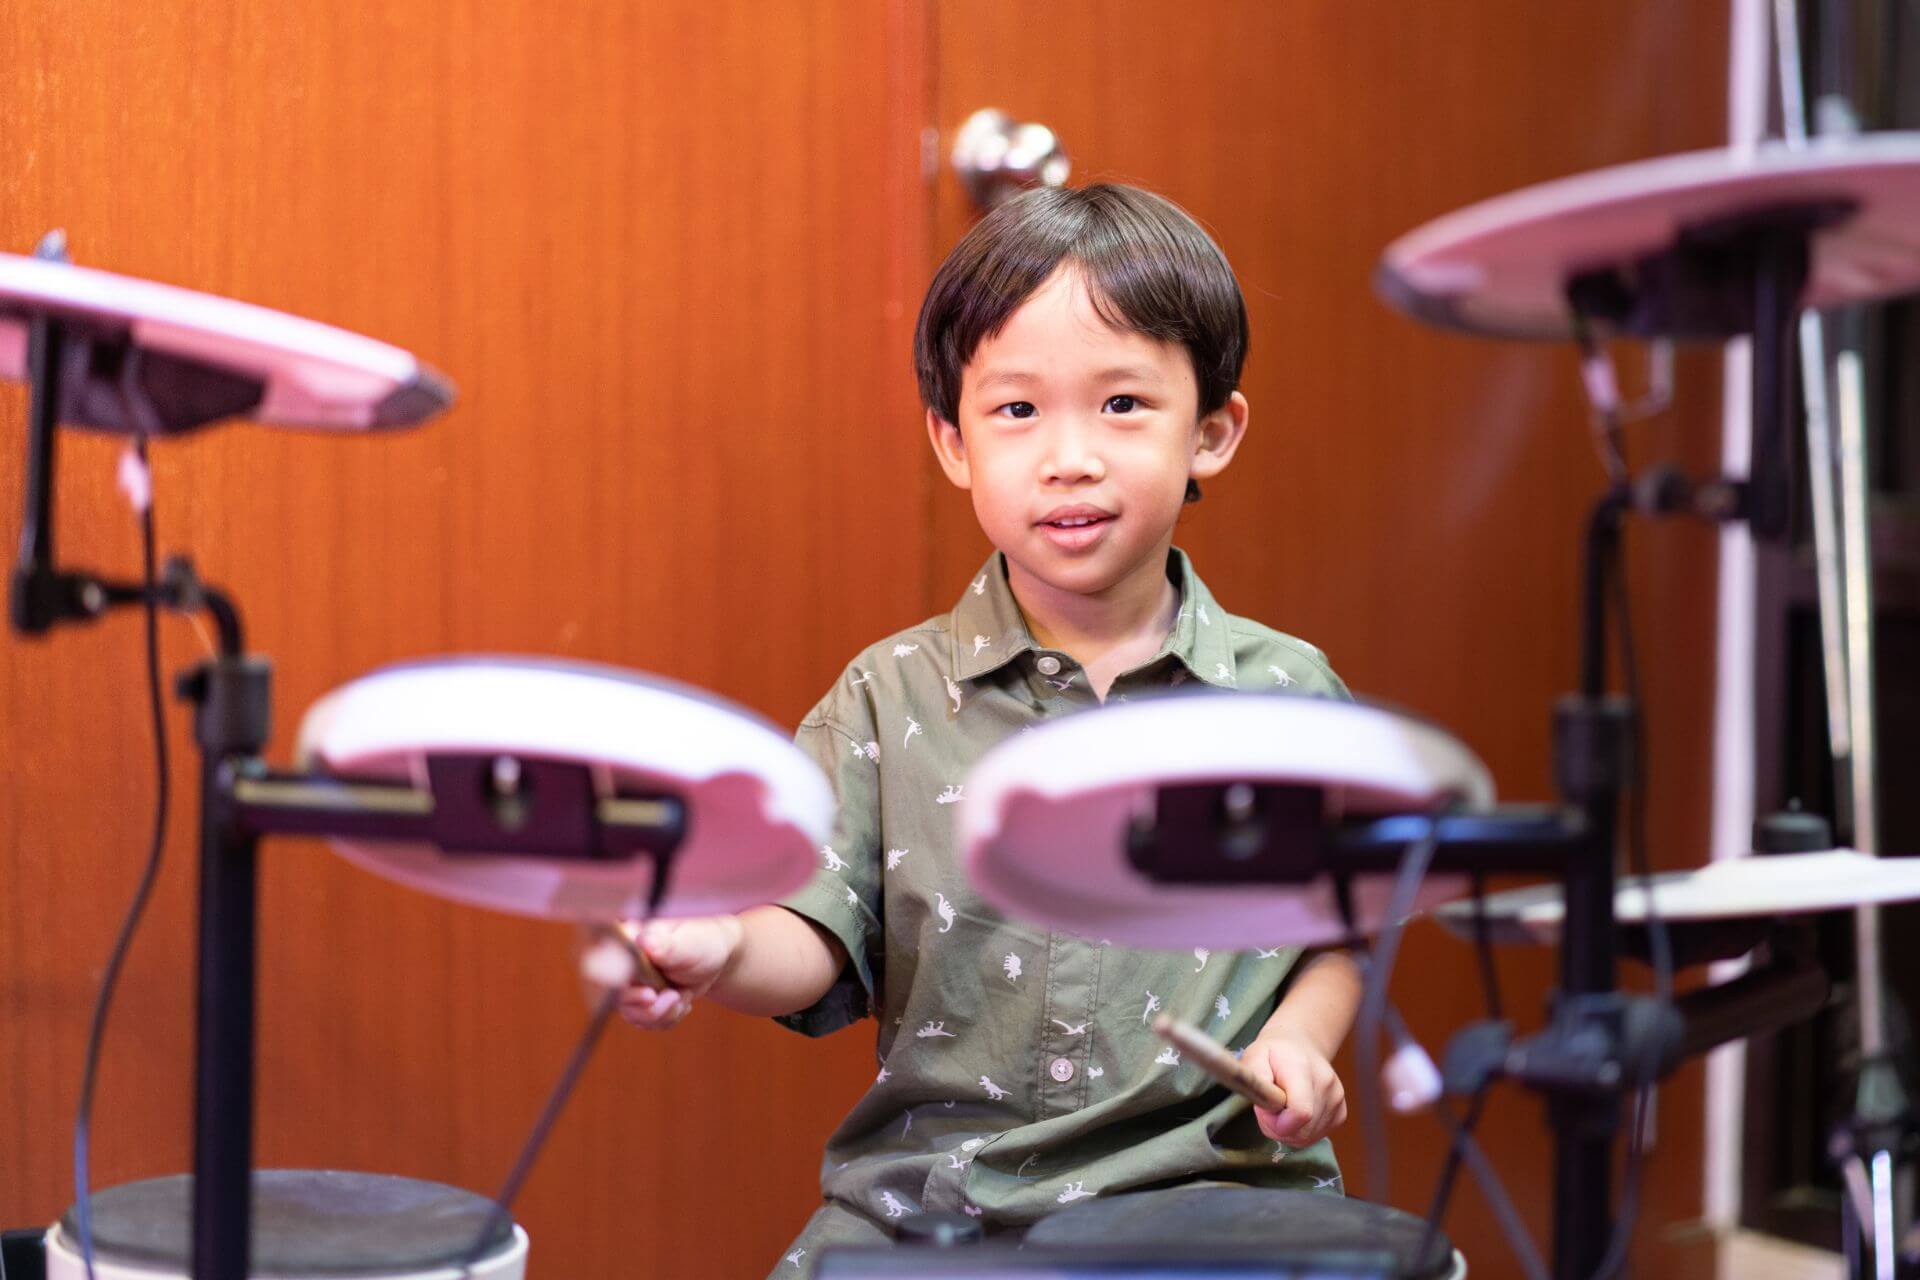 Drum Lessons in Katy/Cinco Ranch